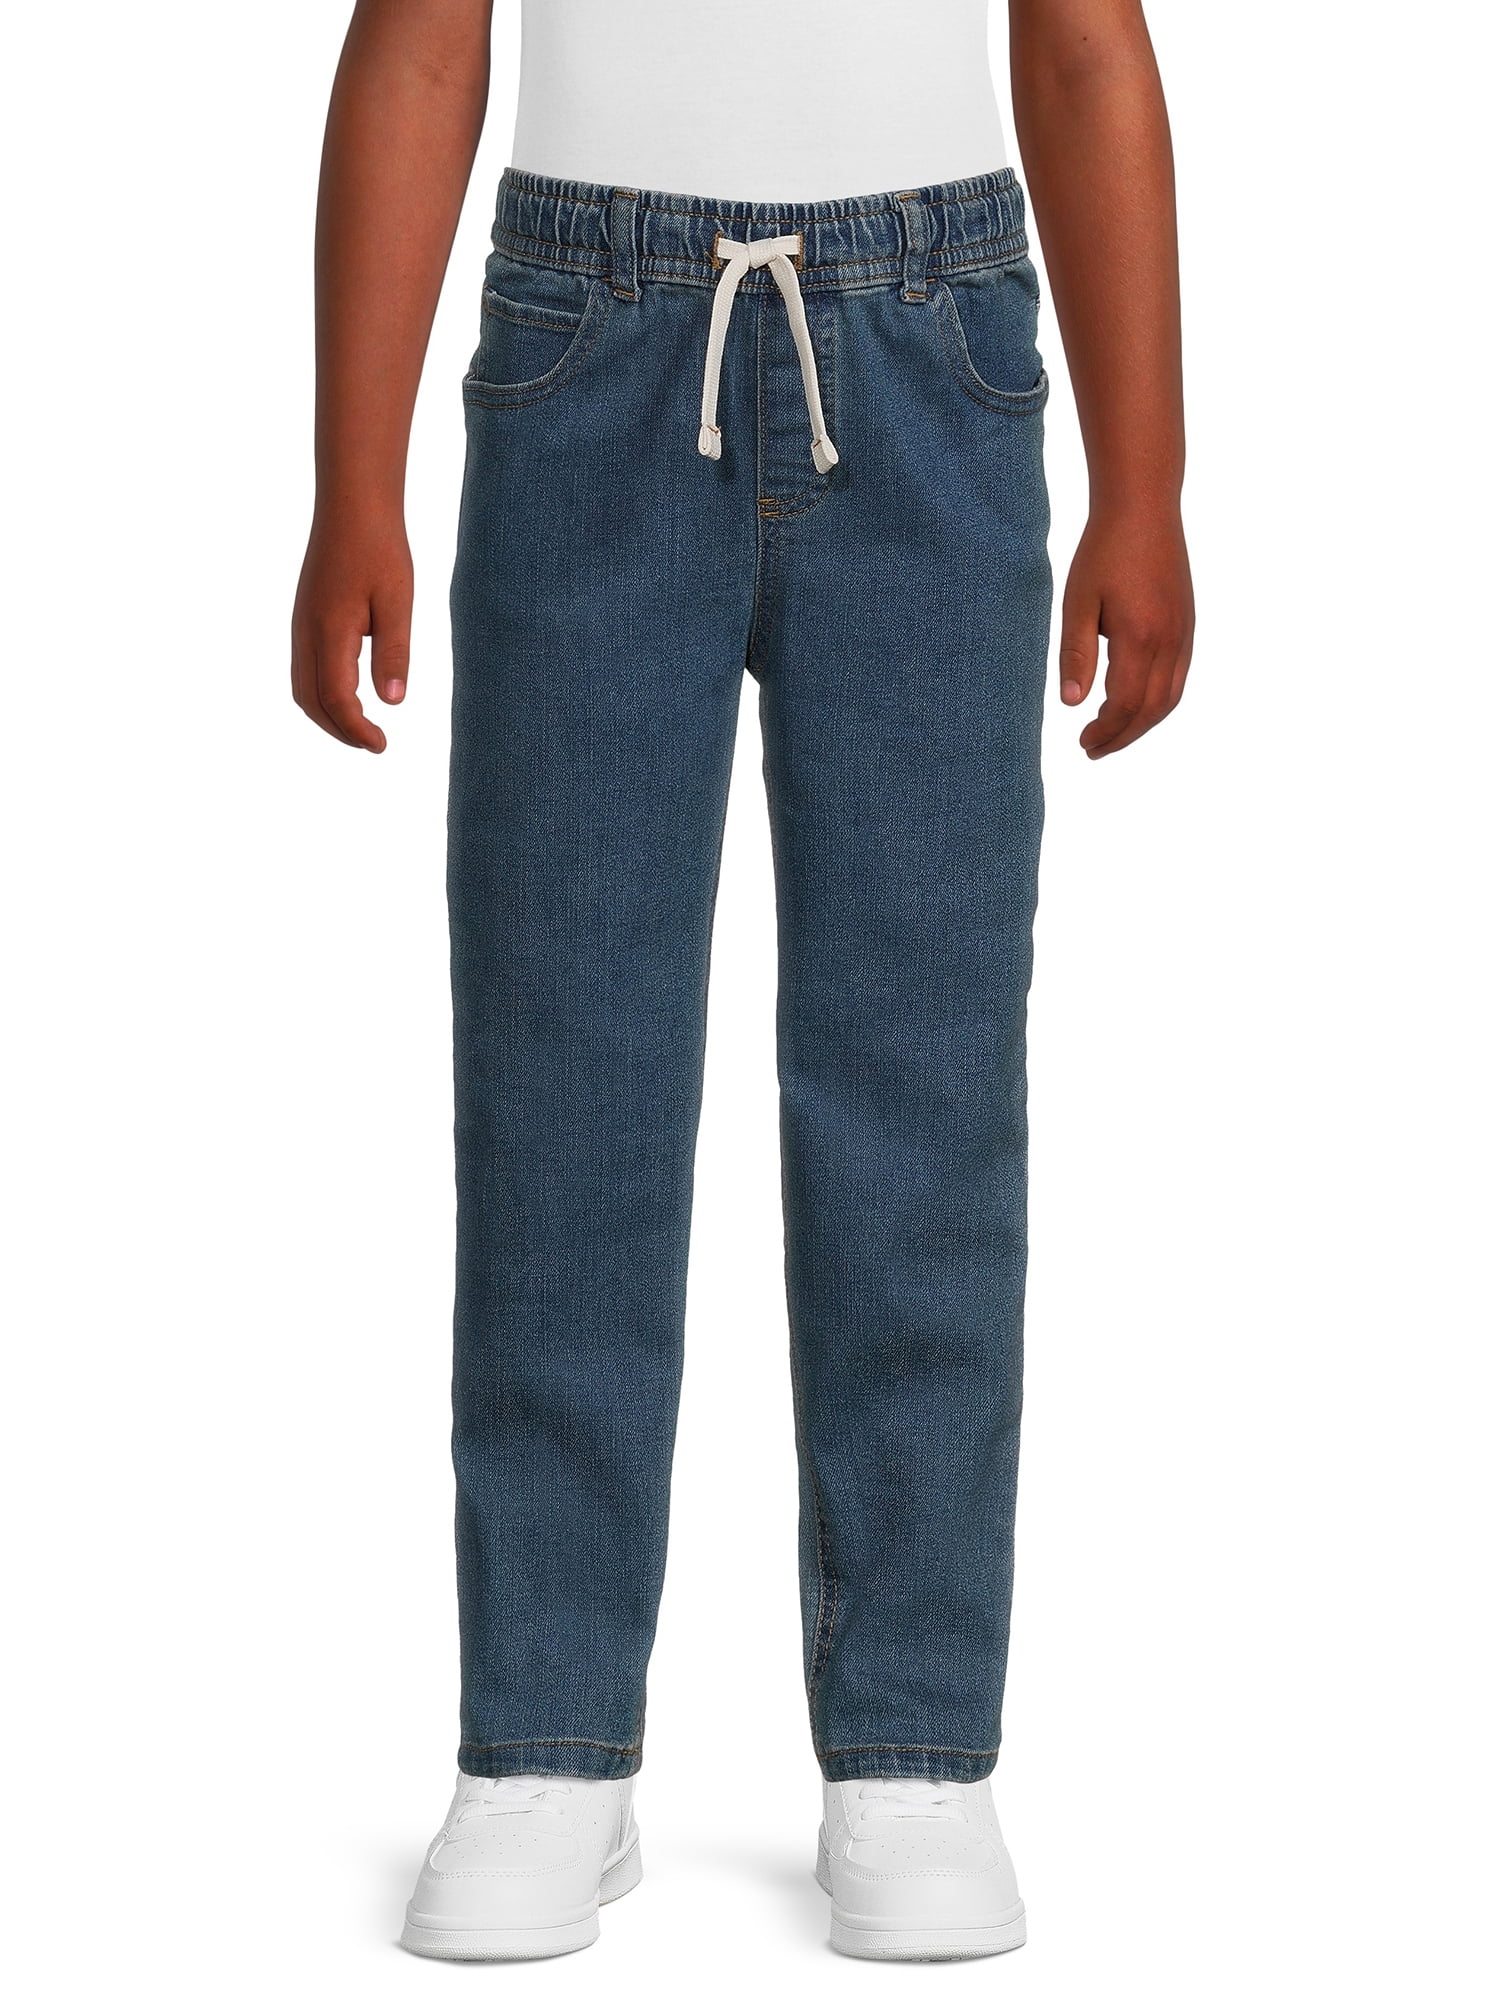 365 Kids from Garanimals Boys Pull-On Jeans, Sizes 4-10 